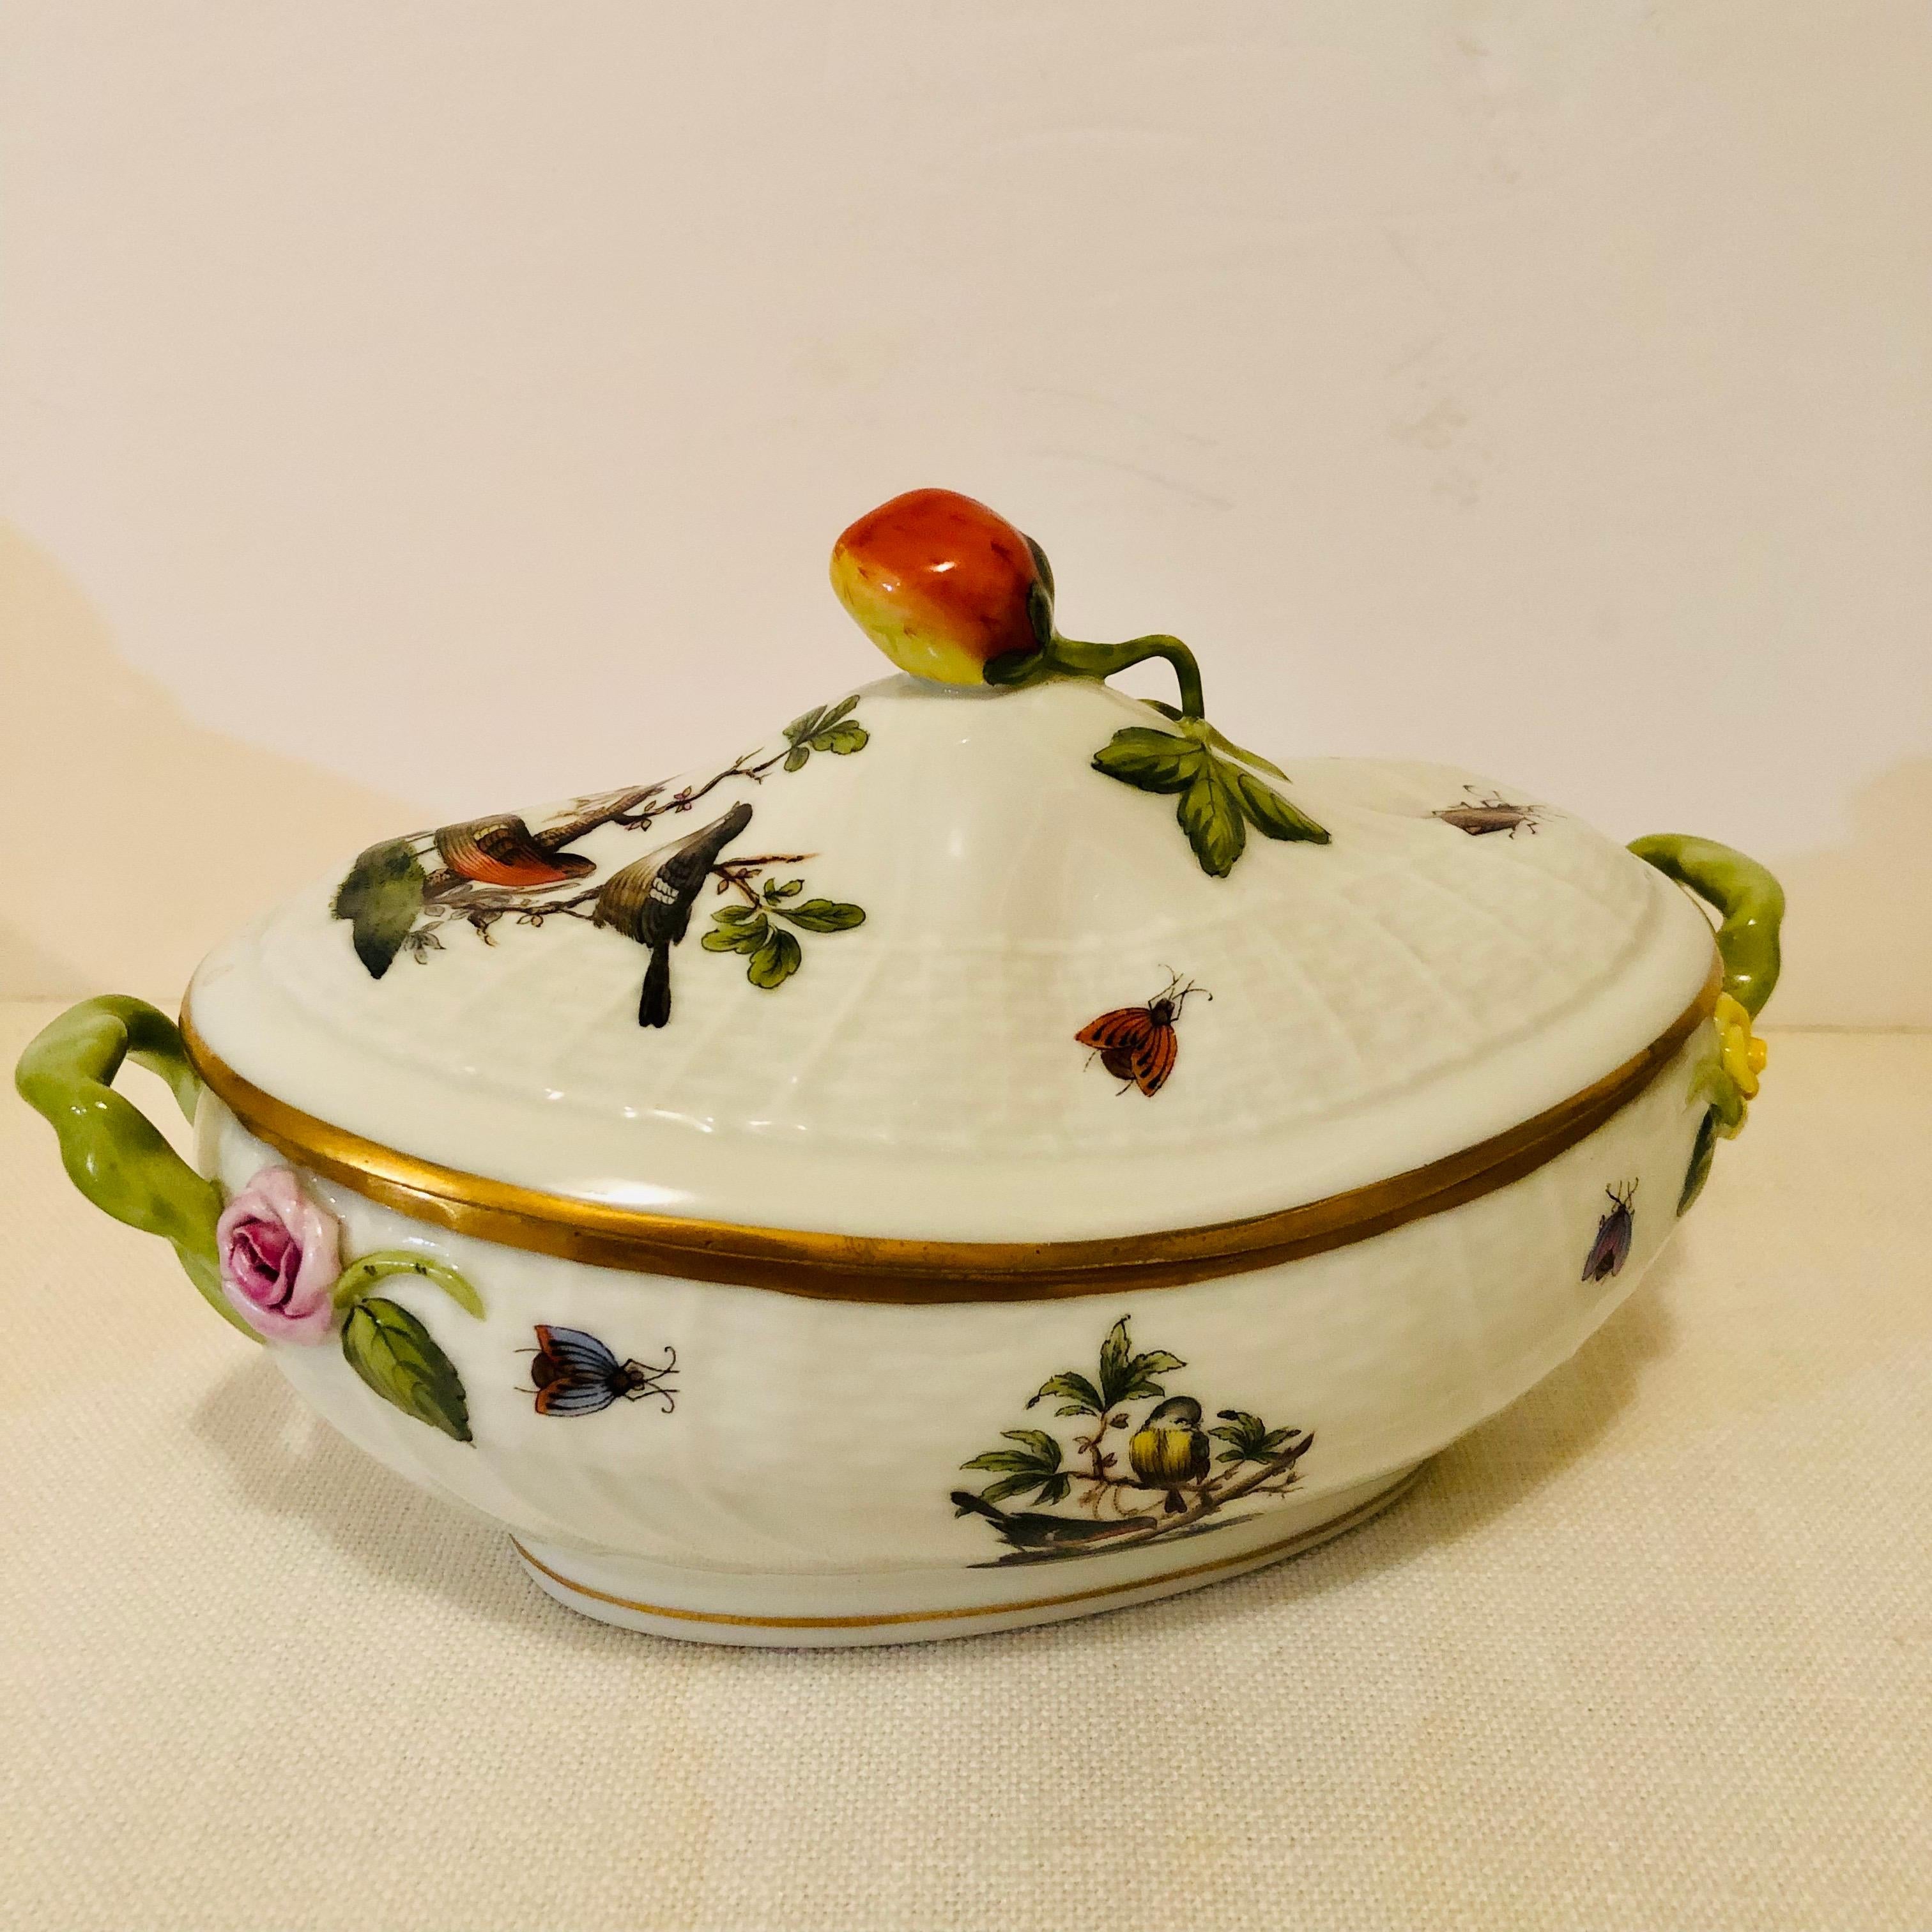 This is a wonderful Herend Rothschild bird sauceboat hand painted with birds with colorful accents of butterflies and insects on a white ground. The top is painted with a pair of birds surrounded by colorful insect and butterfly decoration with a